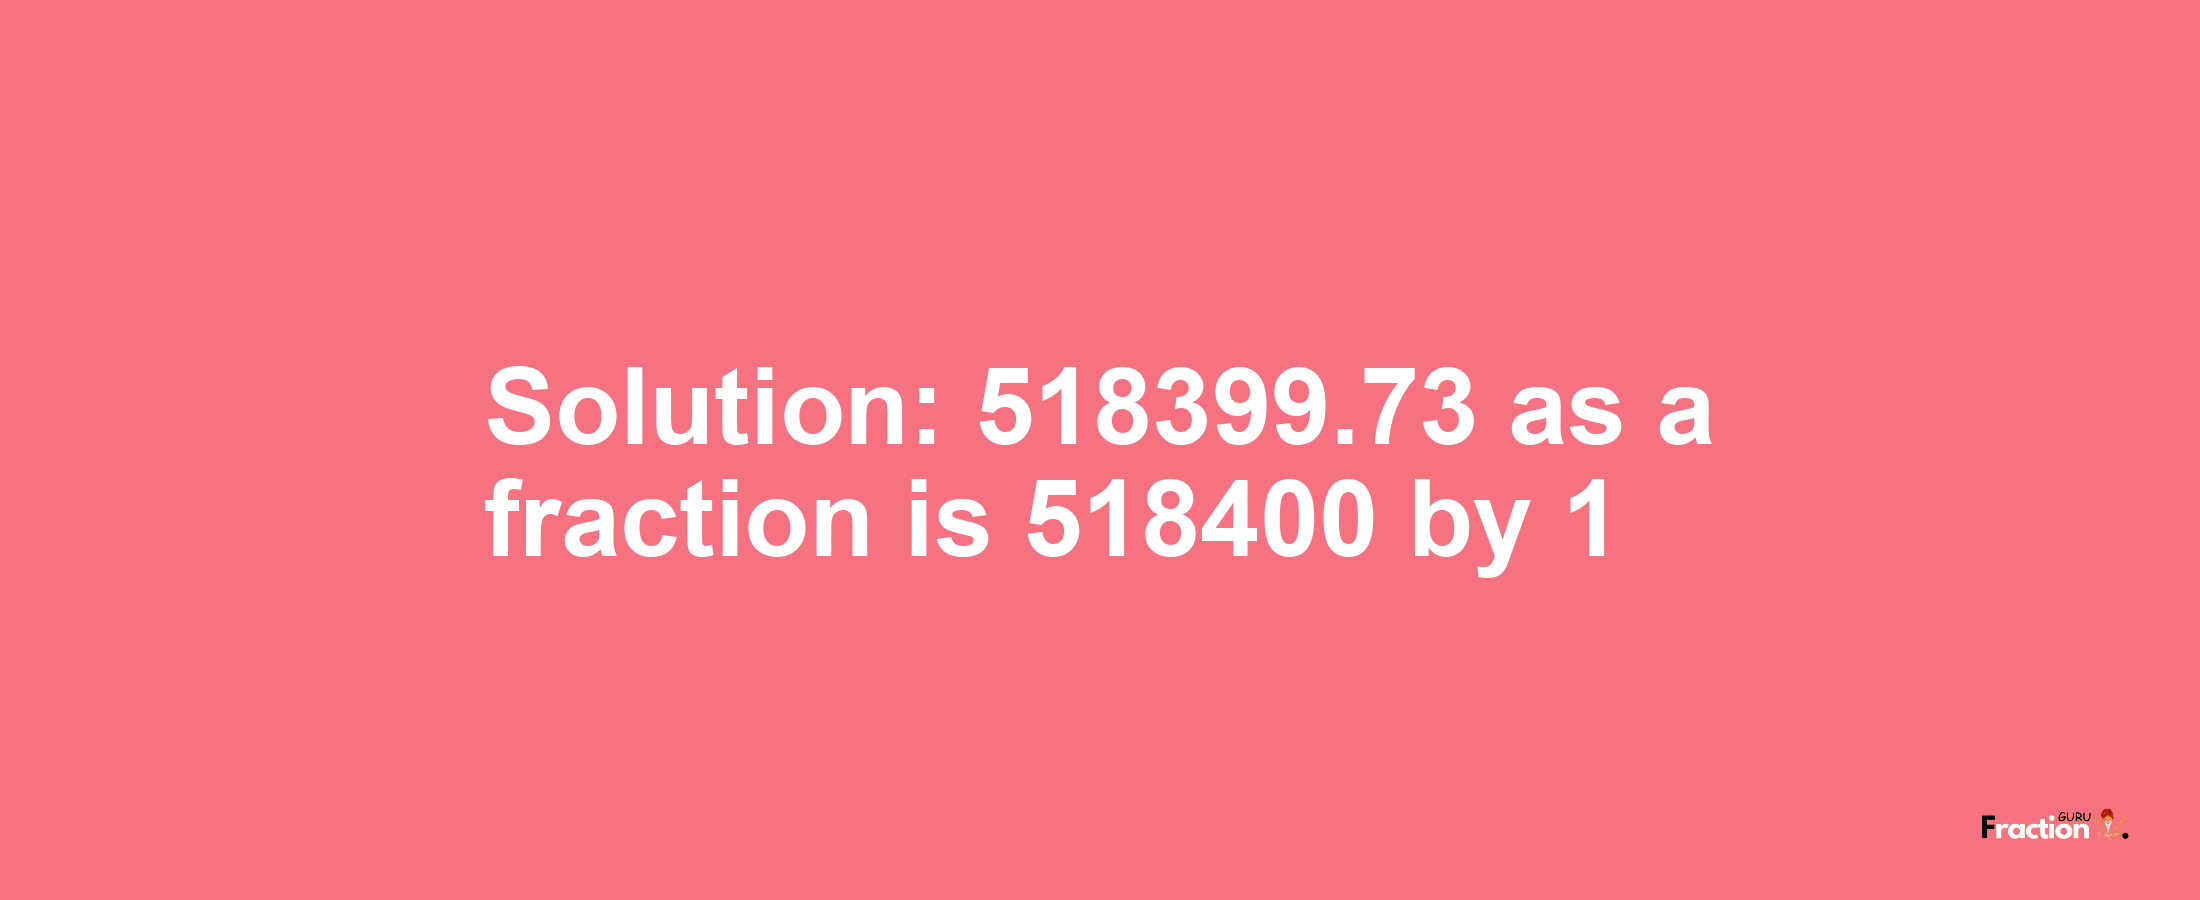 Solution:518399.73 as a fraction is 518400/1